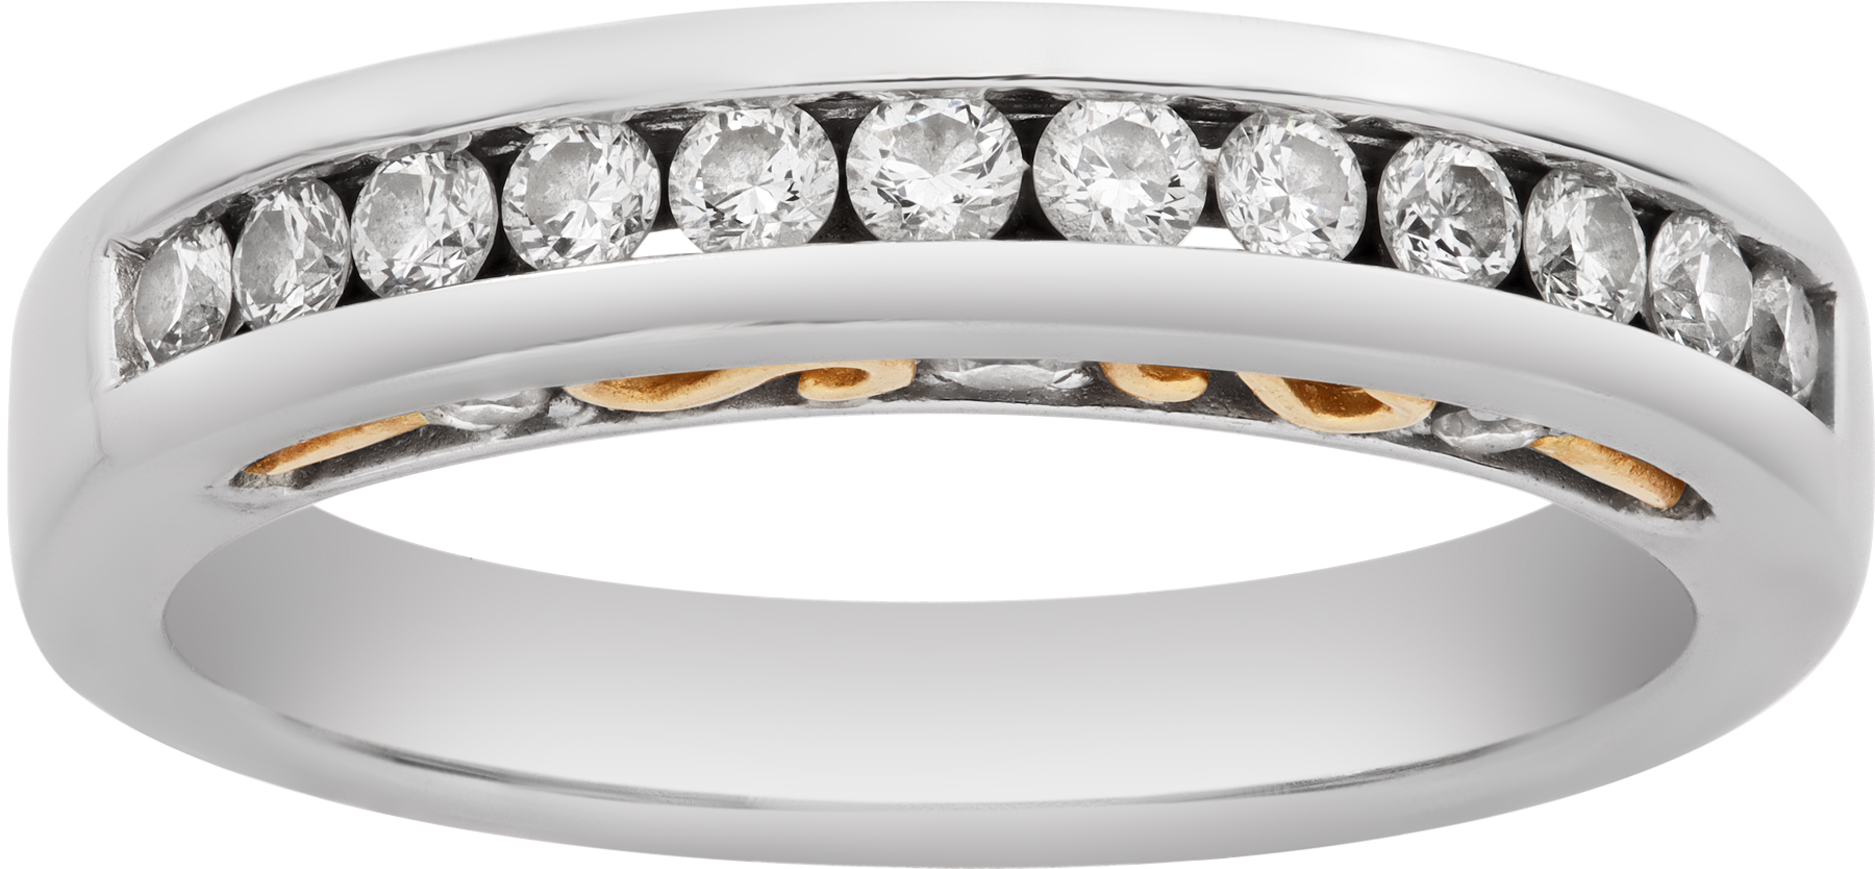 14k white gold diamond ring with approximately 0.5 carat in round brilliant cut diamonds